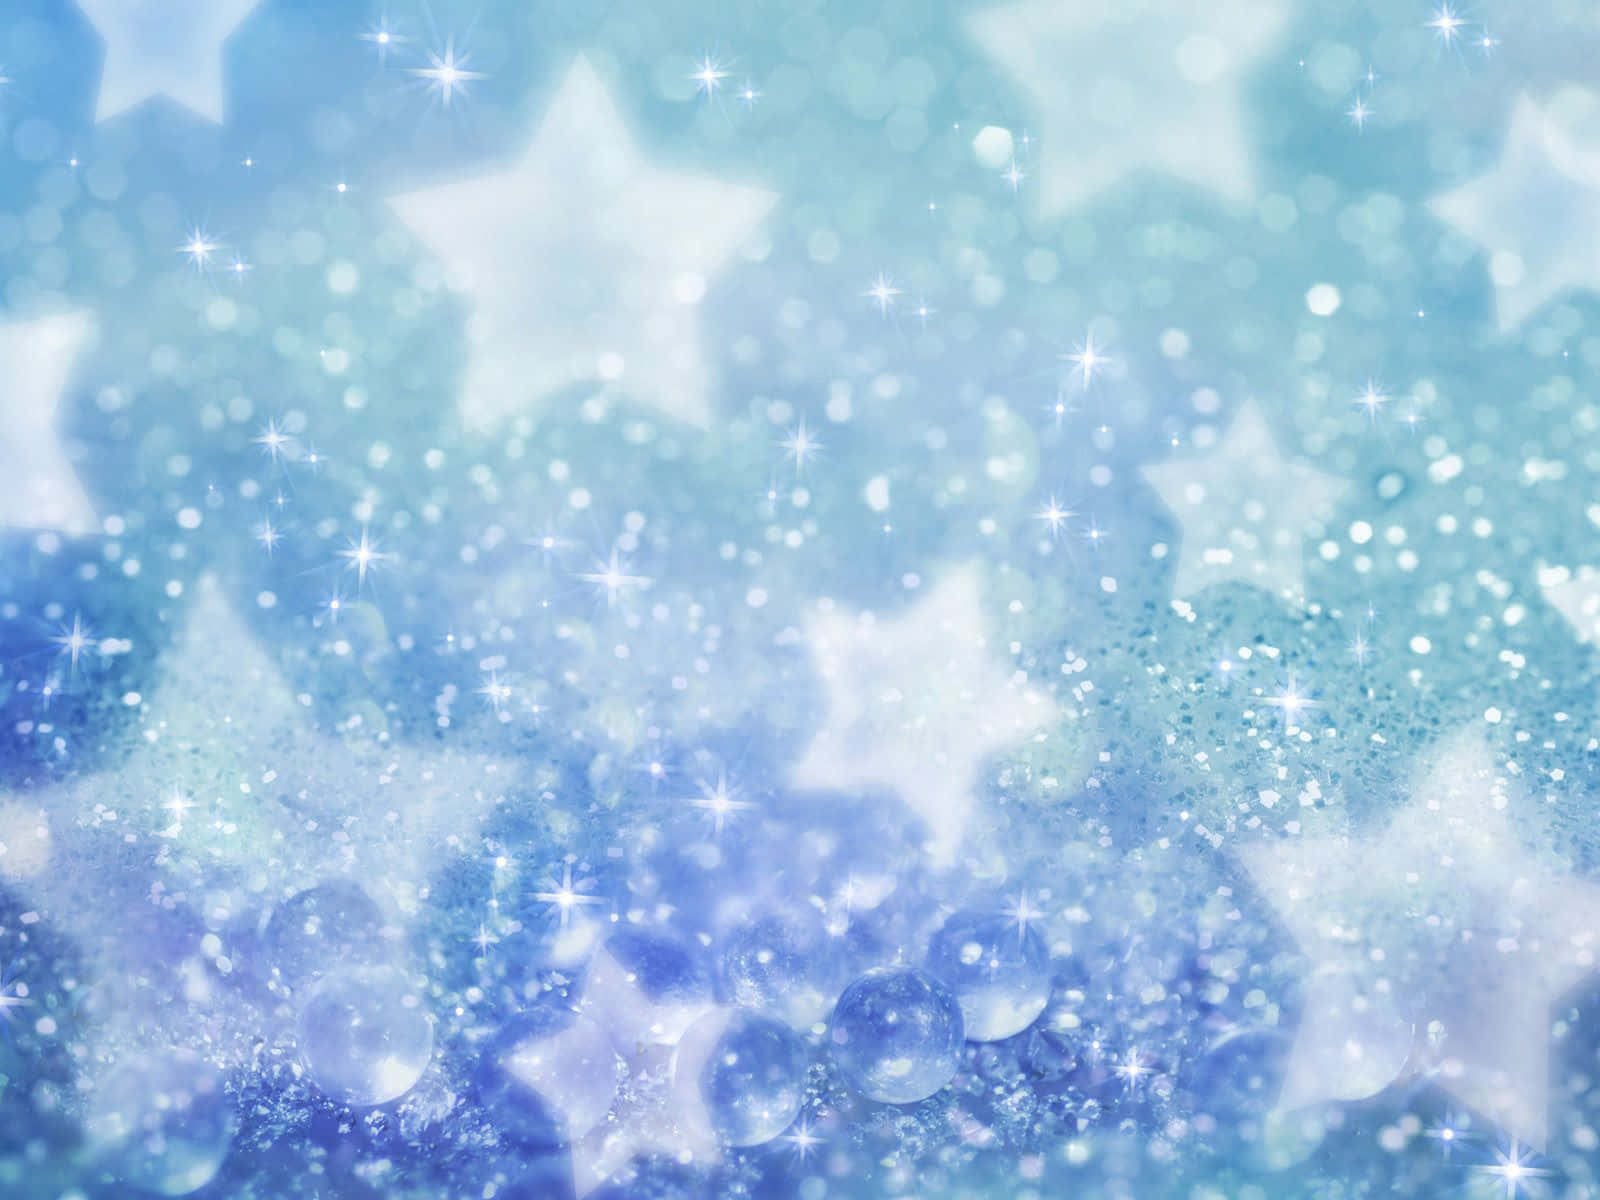 Twinkling Blue Stars Sparkling in the Night Sky Wallpaper